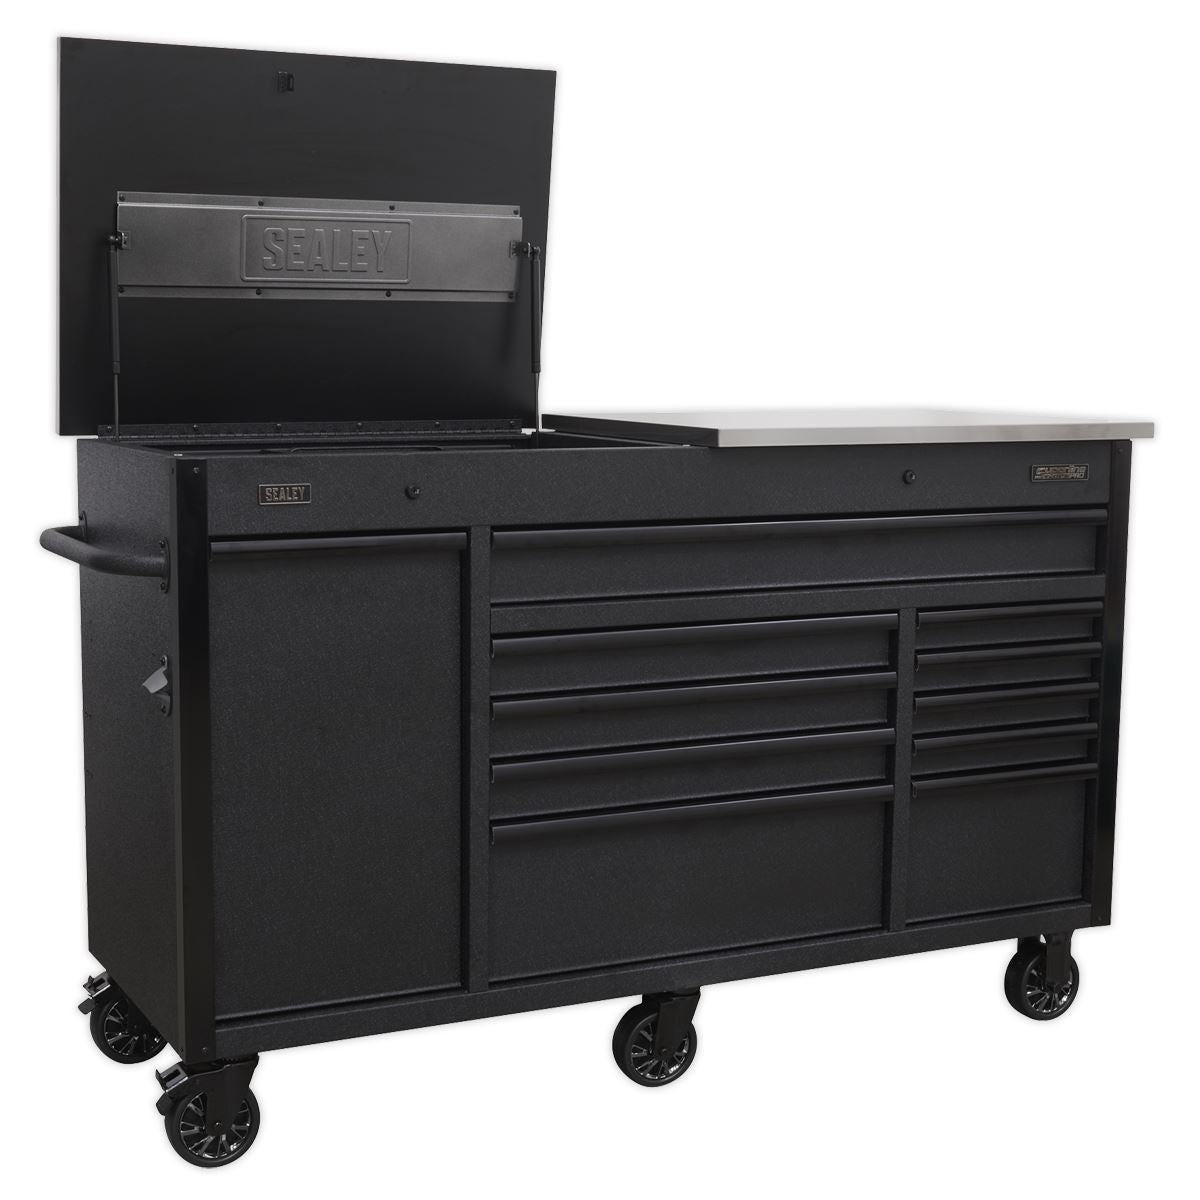 Sealey Superline Pro Mobile Tool Cabinet 1600mm with Power Tool Charging Drawer